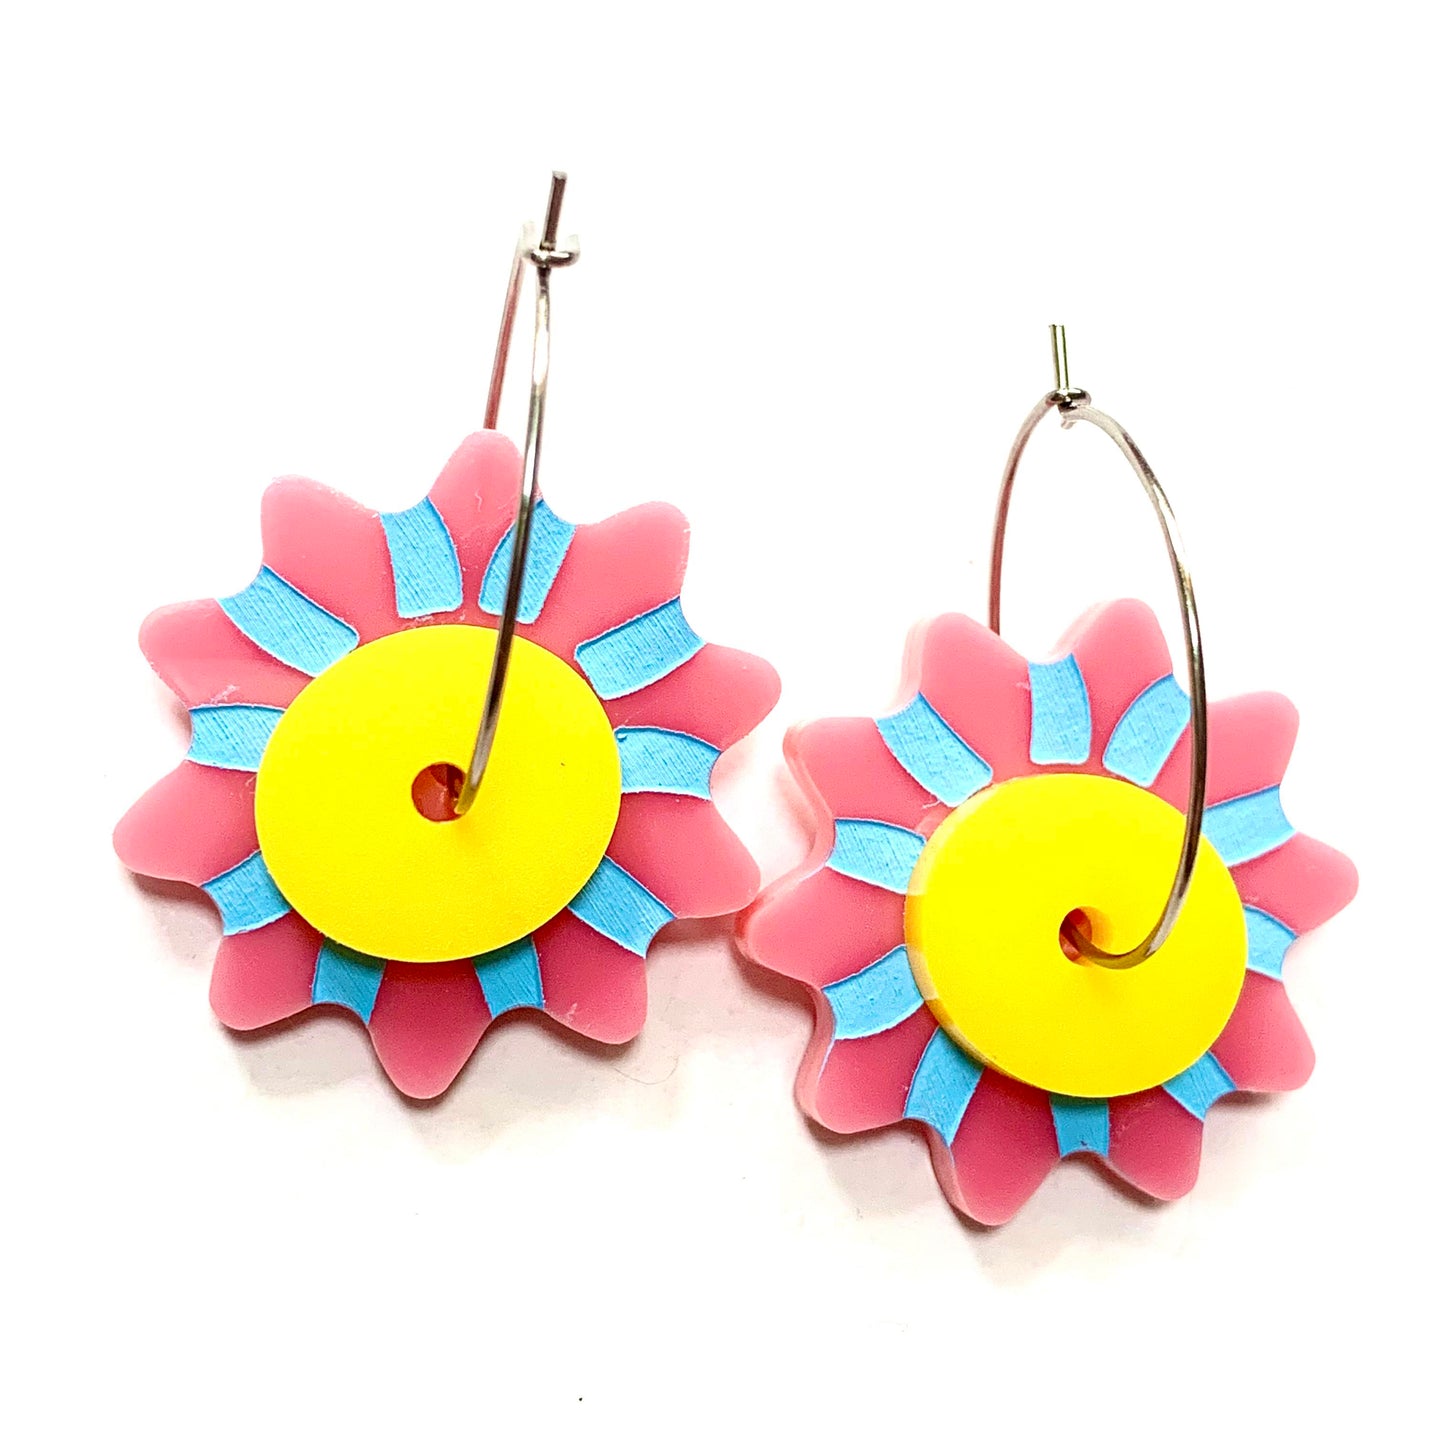 MAKIN' WHOOPEE - "Candy Stripe Blooms" - Hoop Dangles- Piggy Pink & Sunny Yellow